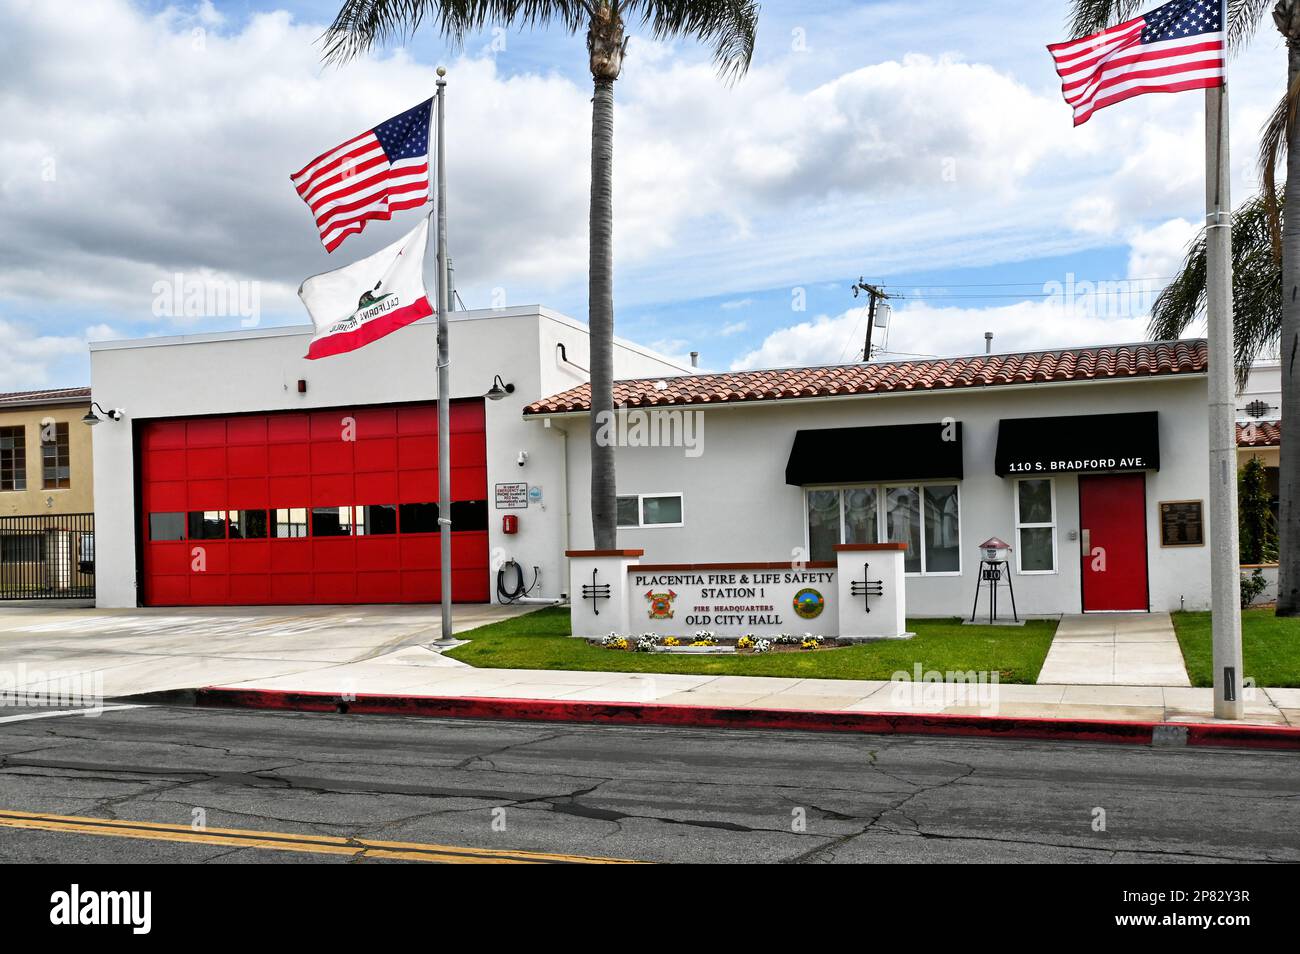 PLACENTIA, CALIFORNIA - 8 MAR 2023: Placentia Fire and Life Safety Station 1 on Bradford Avenue in Old Town. Stock Photo